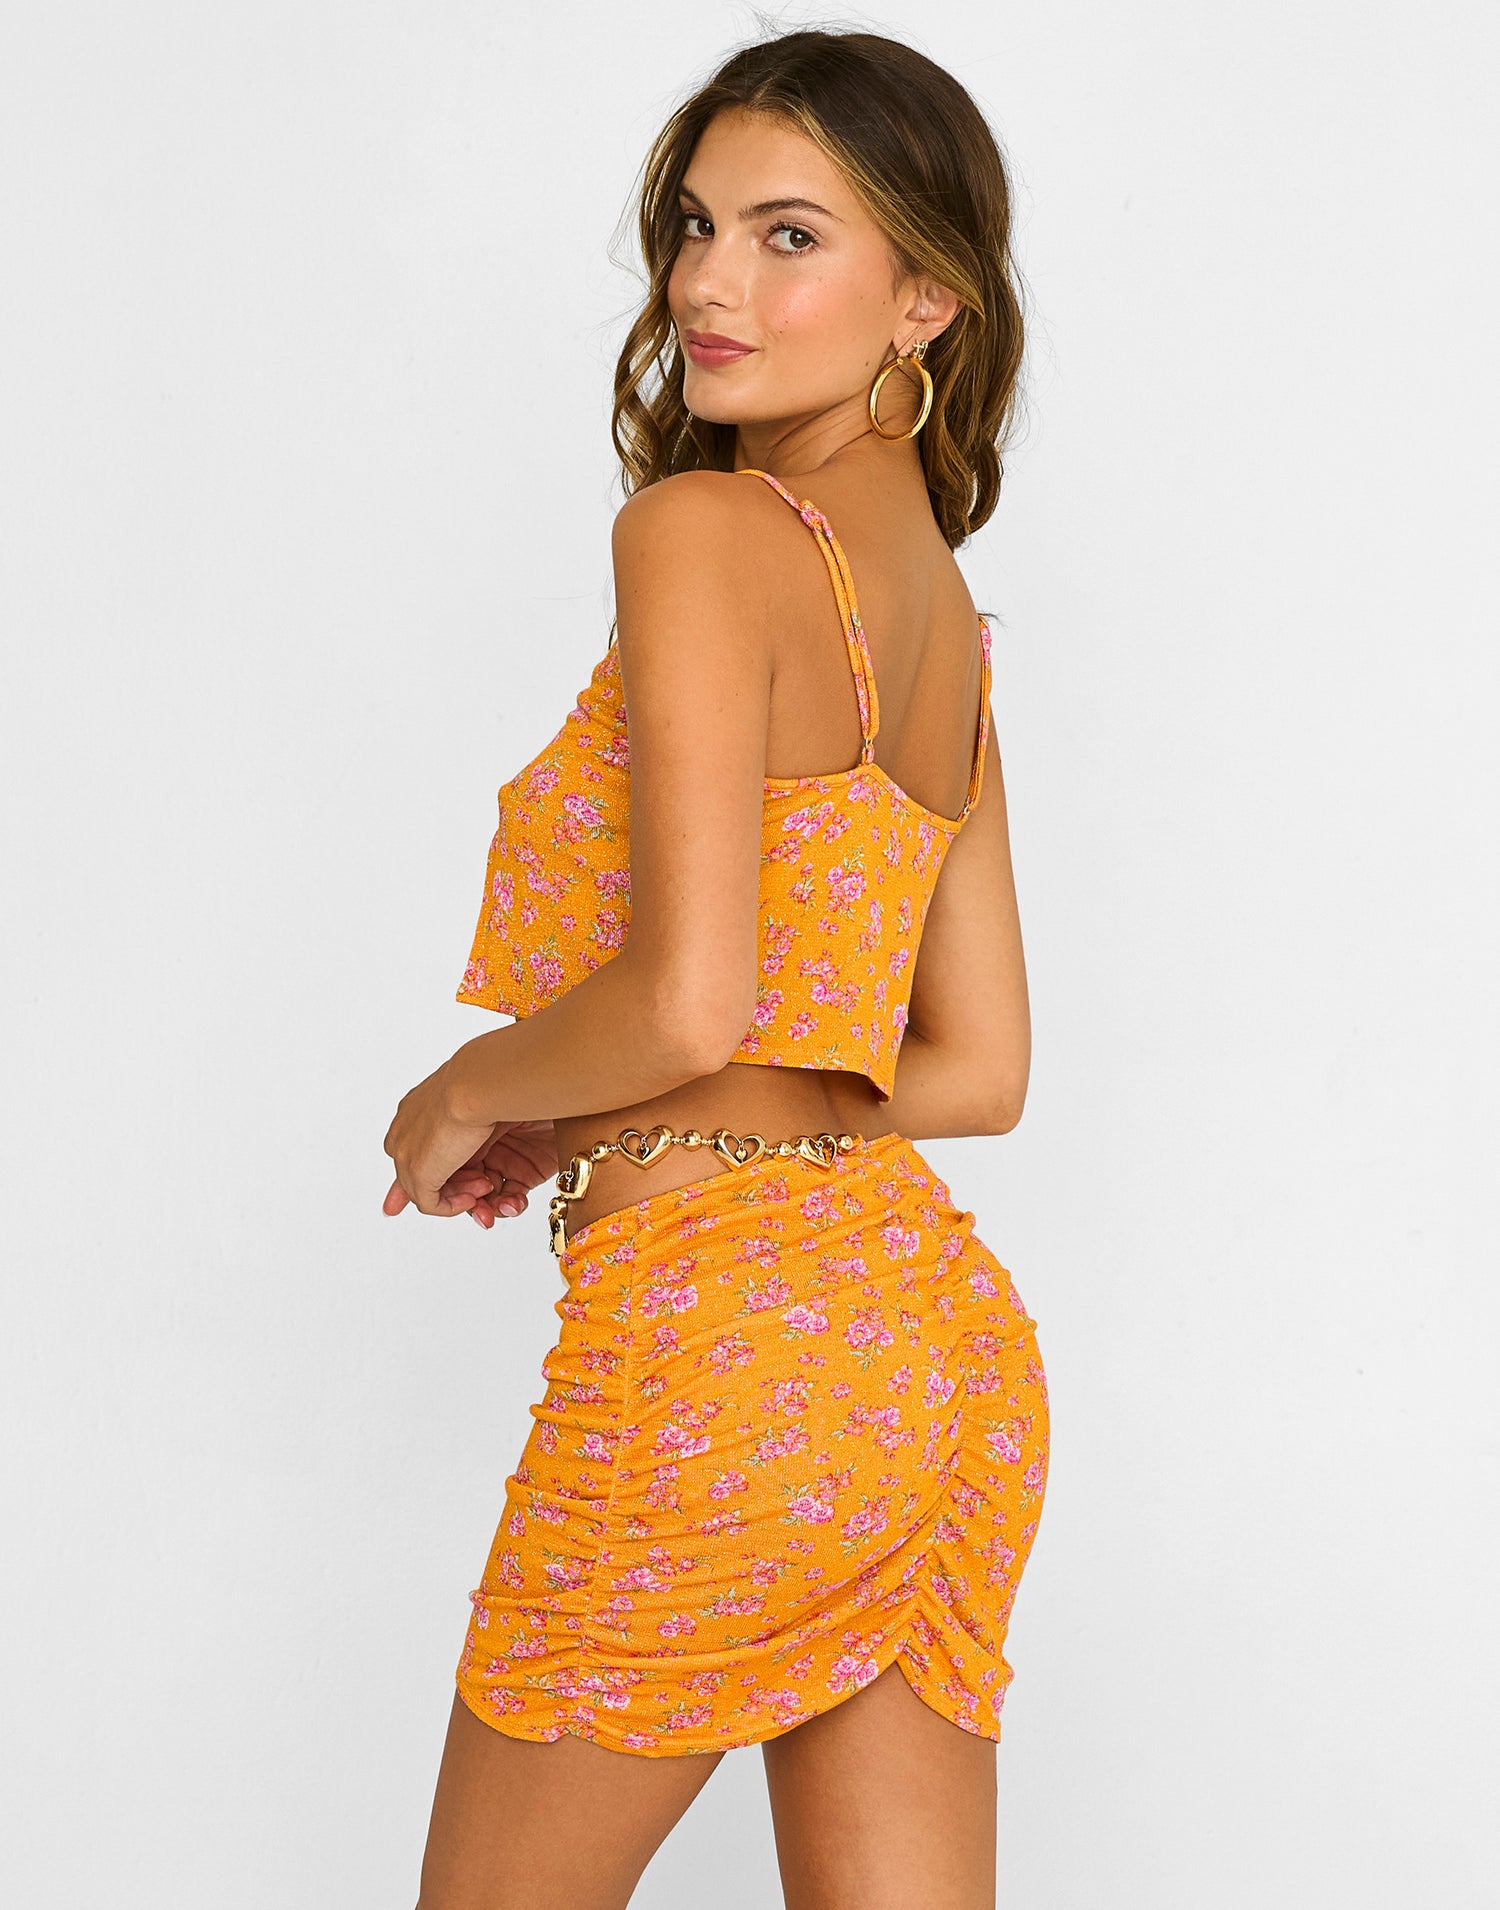 Saddie Knit Mini Skirt Cover Up in Orange Ditsy Floral with Gold Heart Hardware - Back View